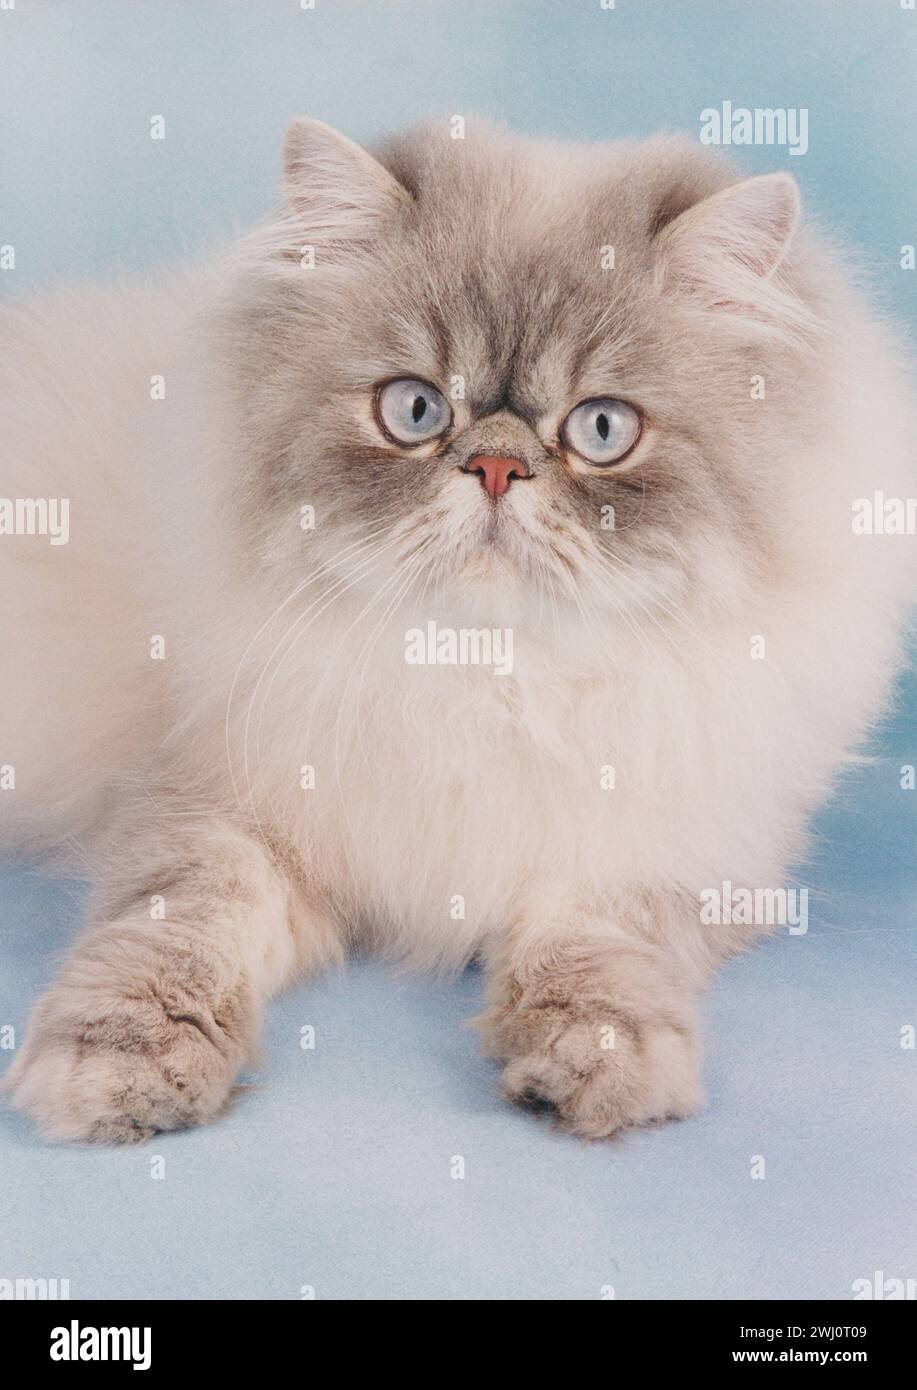 Persian Cat Blue Colourpoint  Head Facing Camera on Baby Blue Background Stock Photo